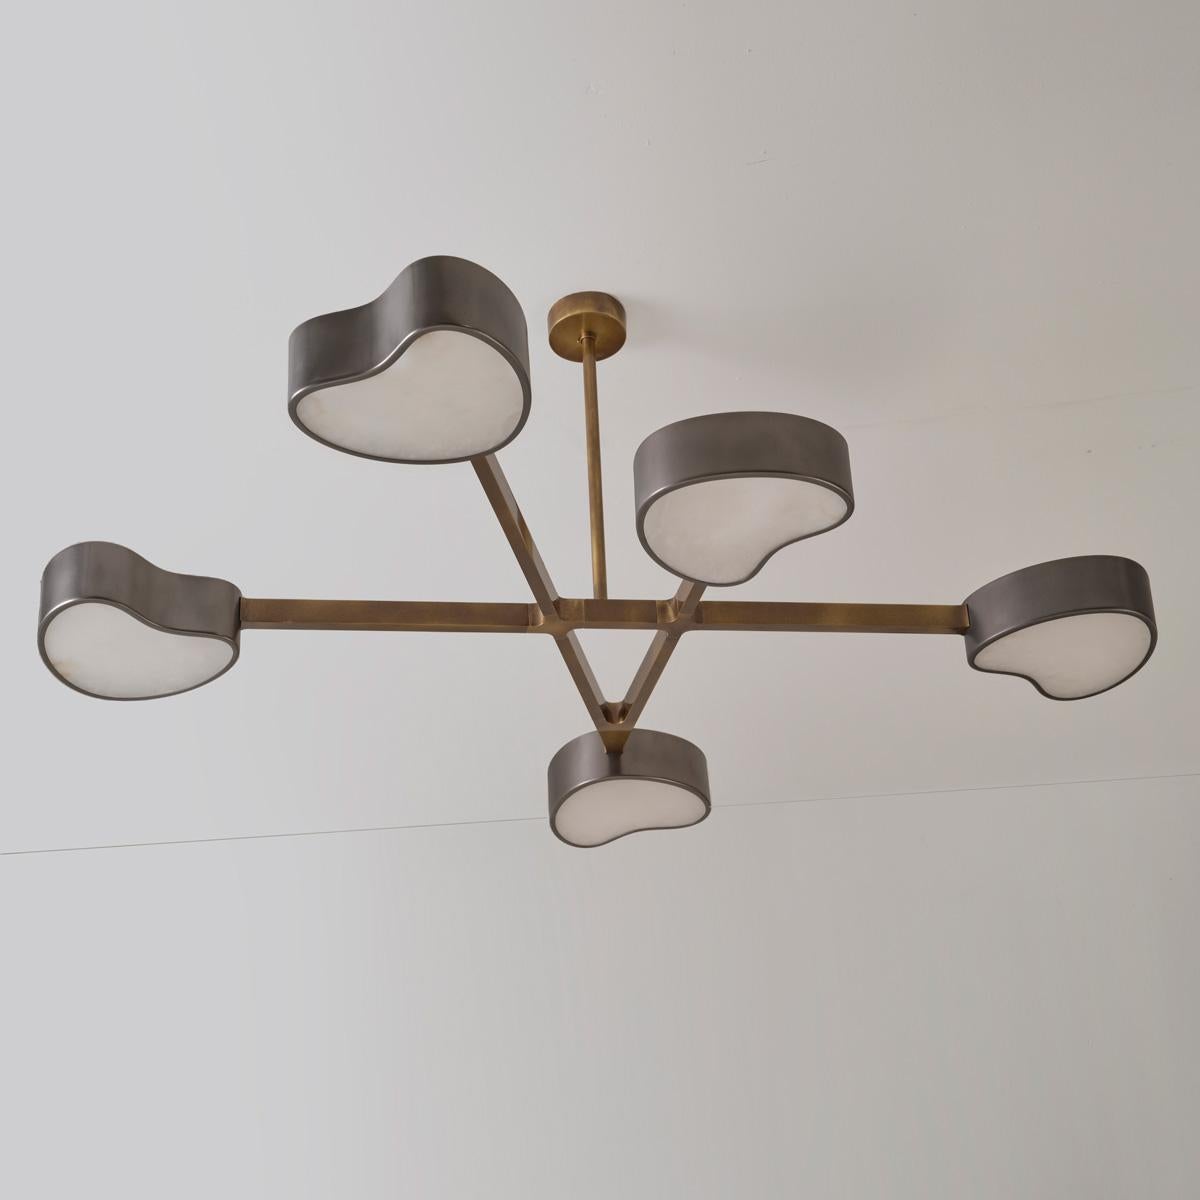 Cuore N.5 Ceiling Light by Gaspare Asaro. Polished Brass Finish For Sale 2